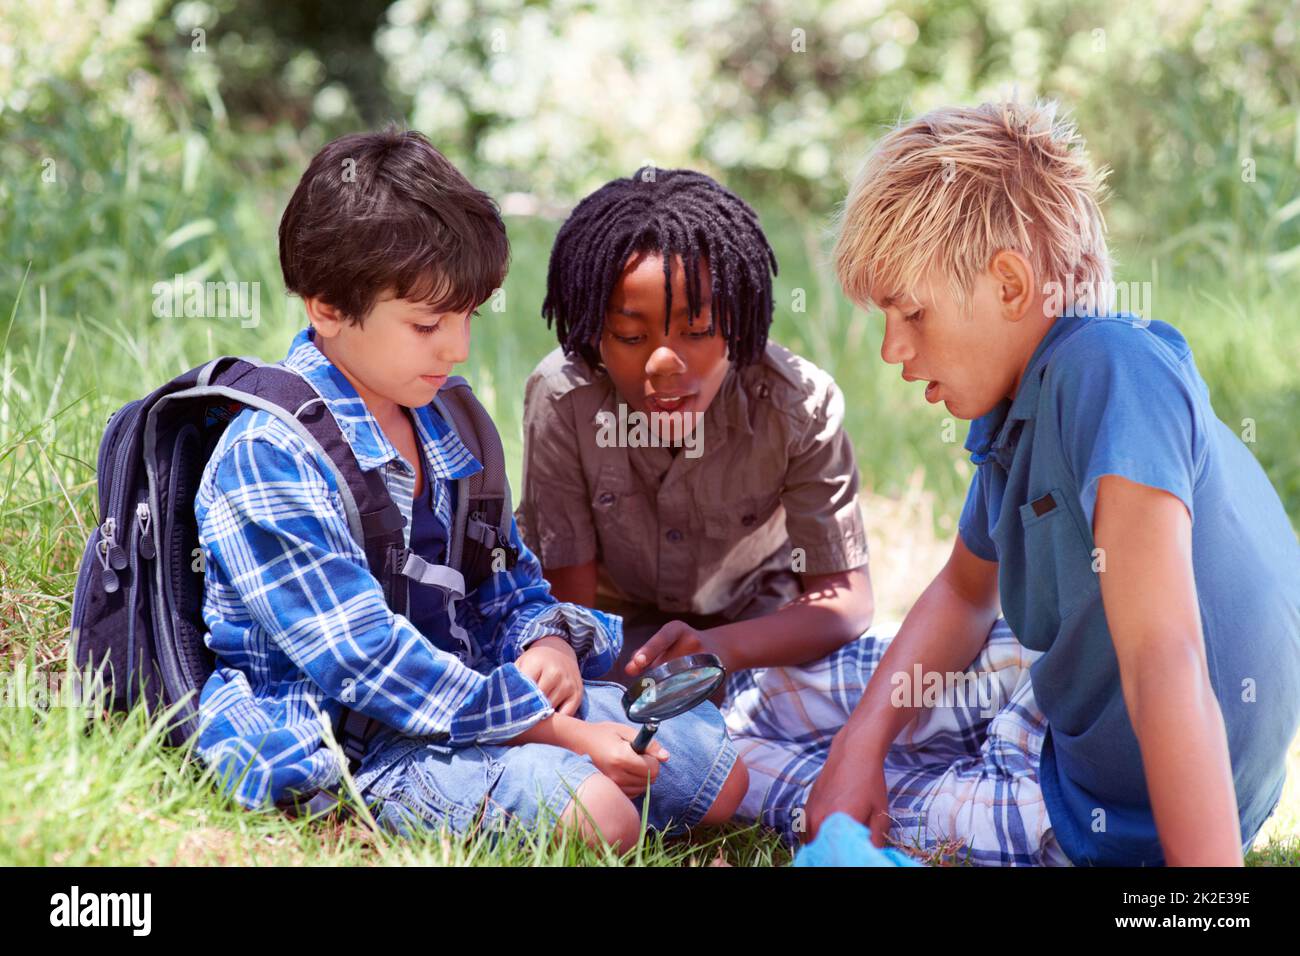 Three little adventurers. Three little boys spending time outdoors together. Stock Photo